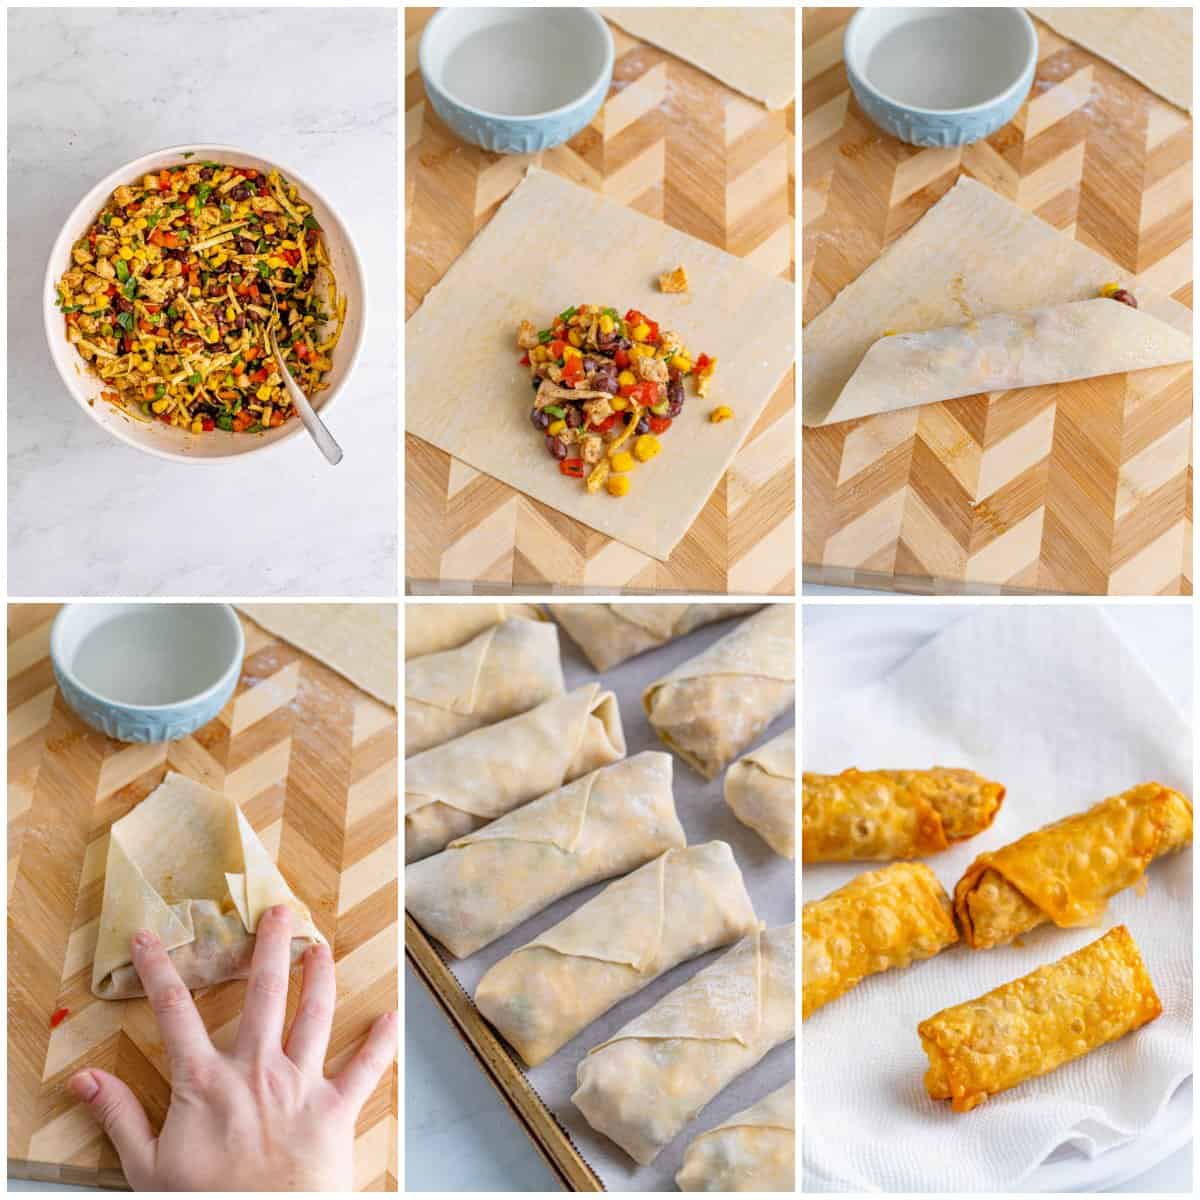 Step by step photos on how to make Southwest Egg Rolls